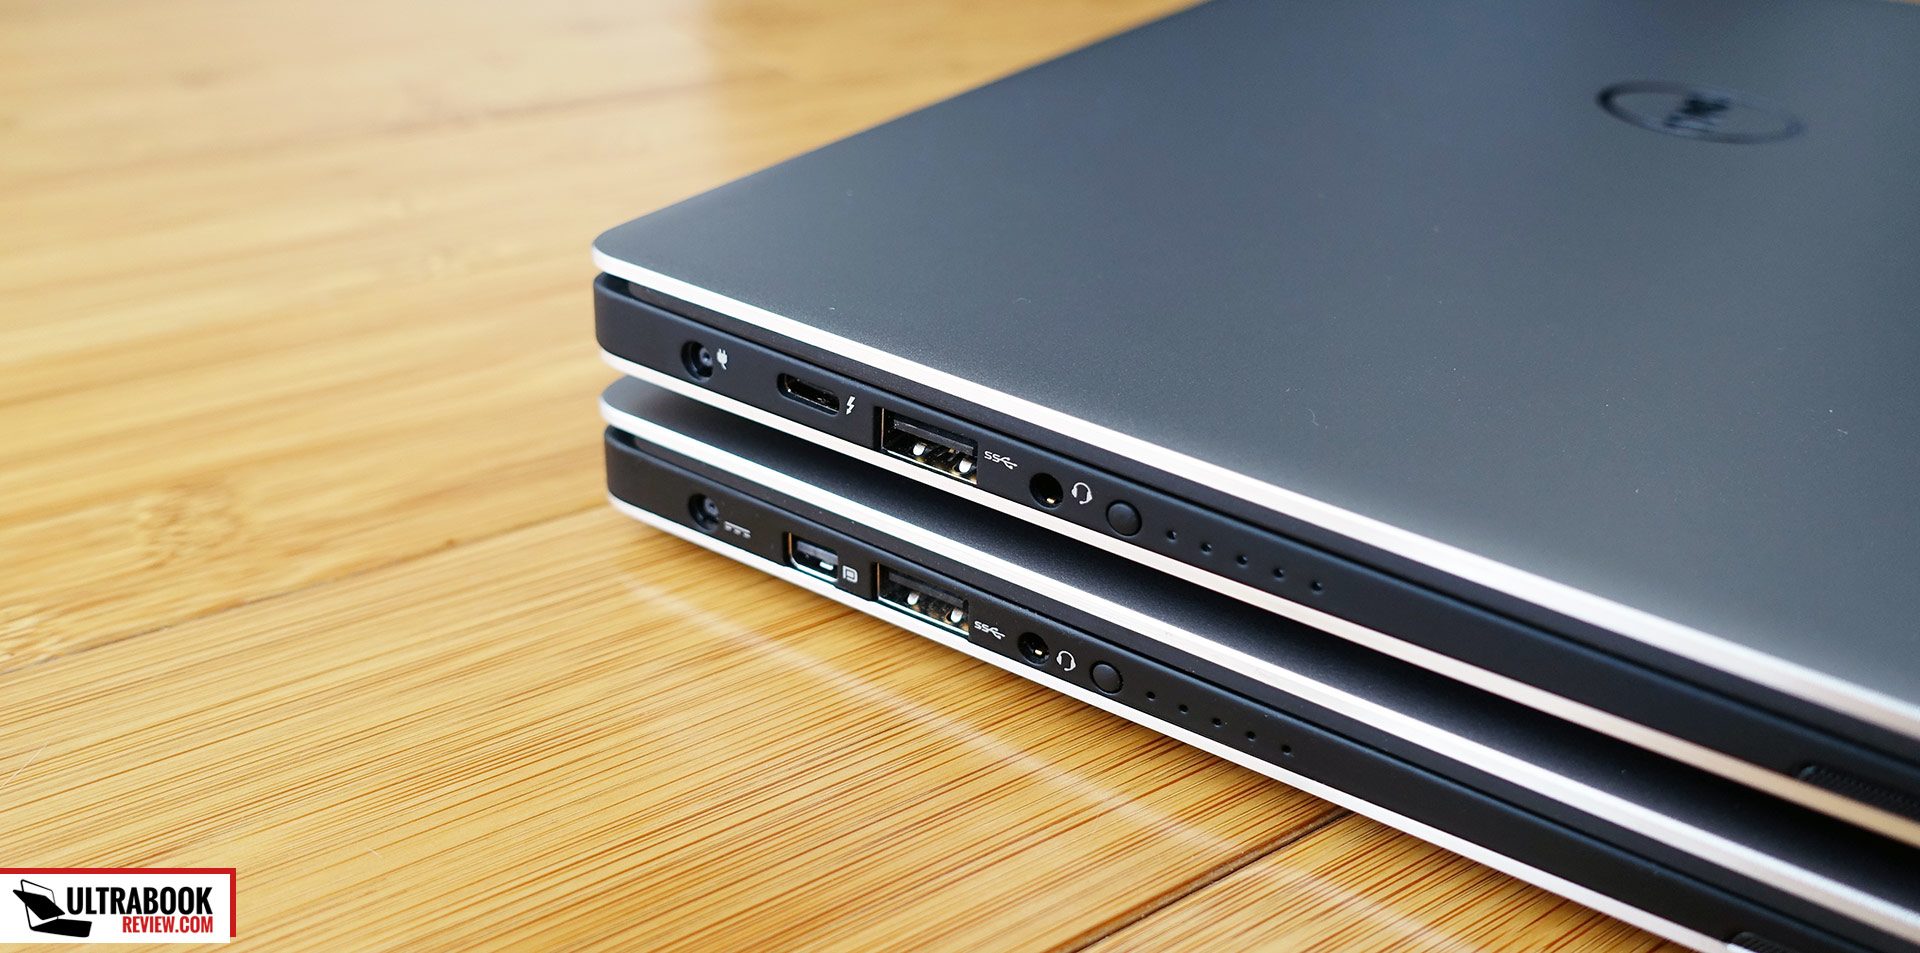 The XPS 9350 (top) gets a Thunderbolt 3 port, which replaces the miniDP port on the XPS 9343 (bottom)